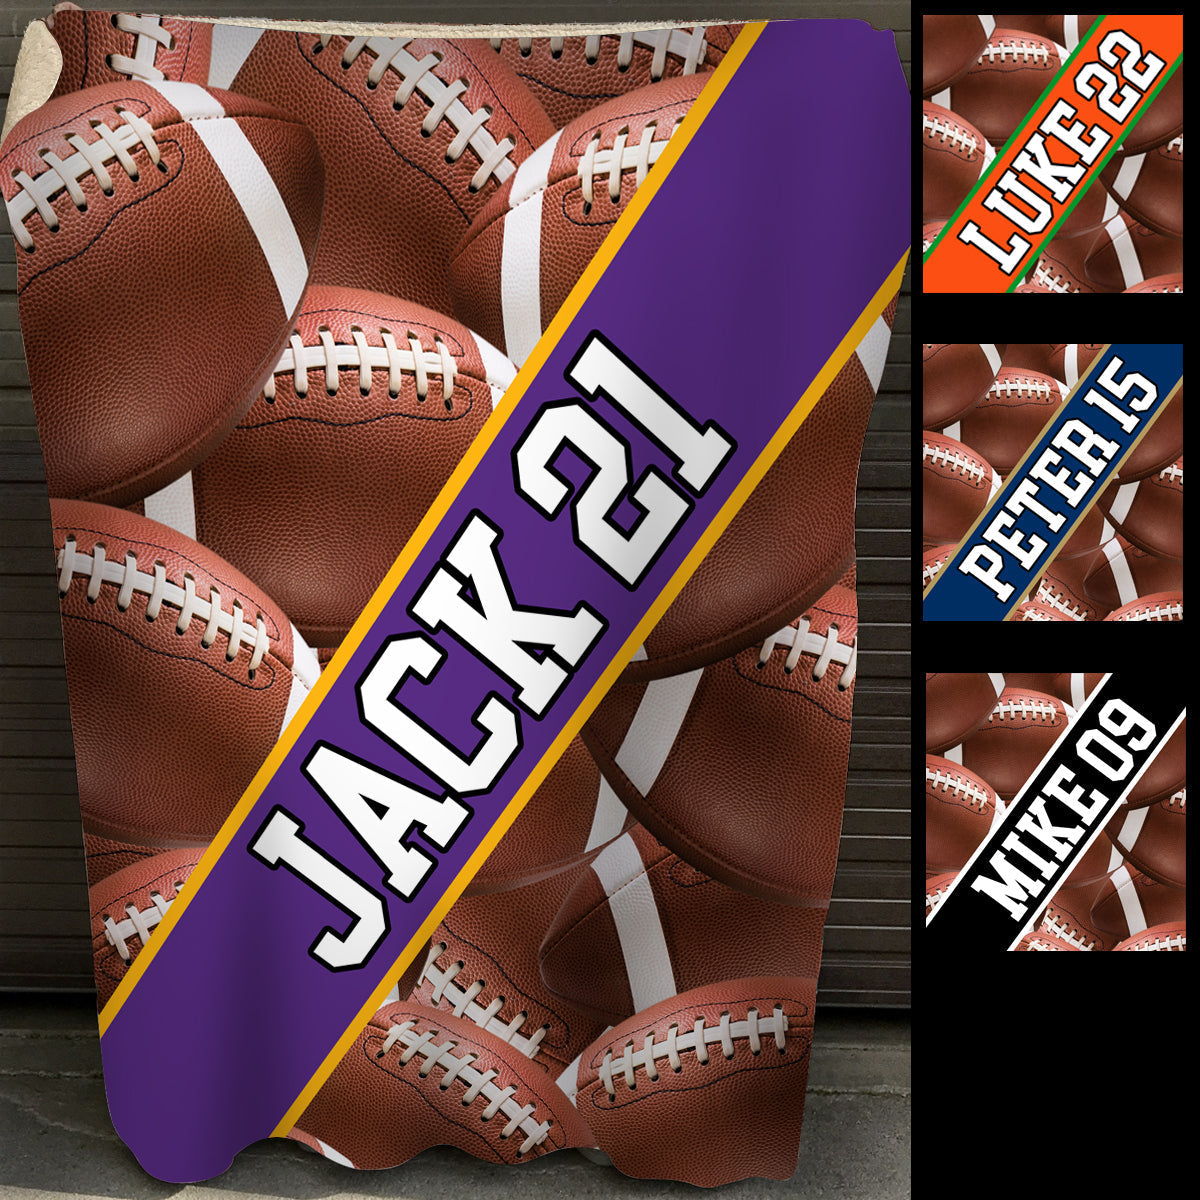 Football Lover - Personalized Blanket - Sport bannergg_0f928e60-f407-48bc-8dc5-66be5b37bf7d.jpg?v=1644998297